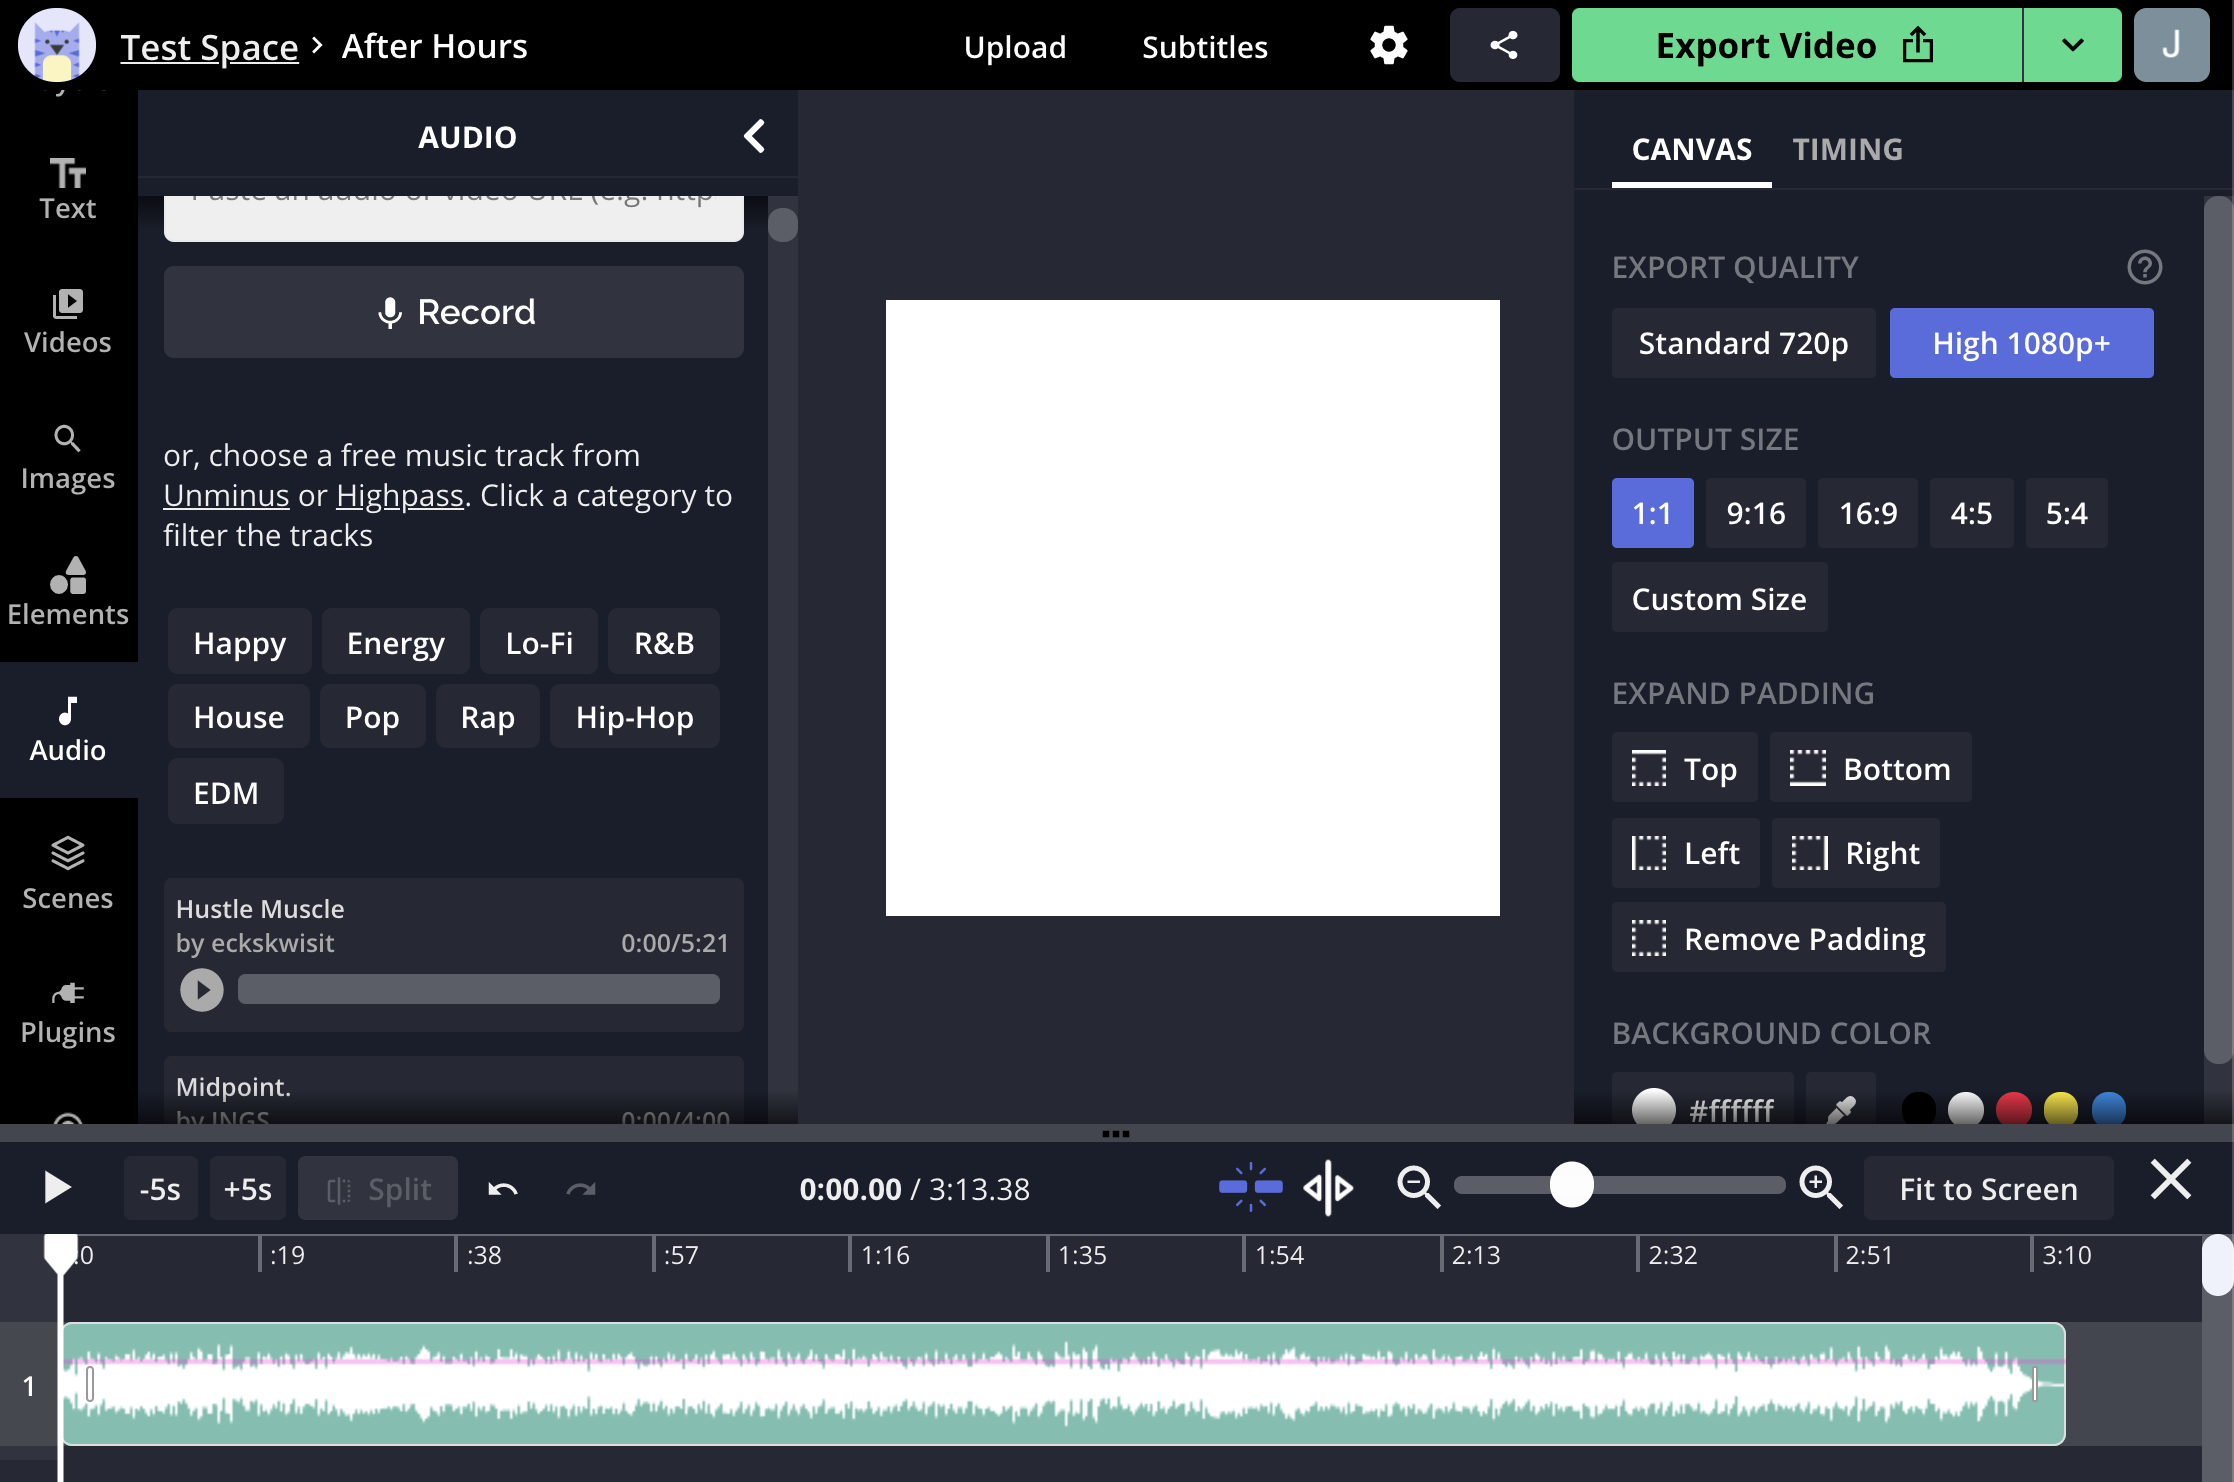 Record, browse, or import audio from "Audio" tab